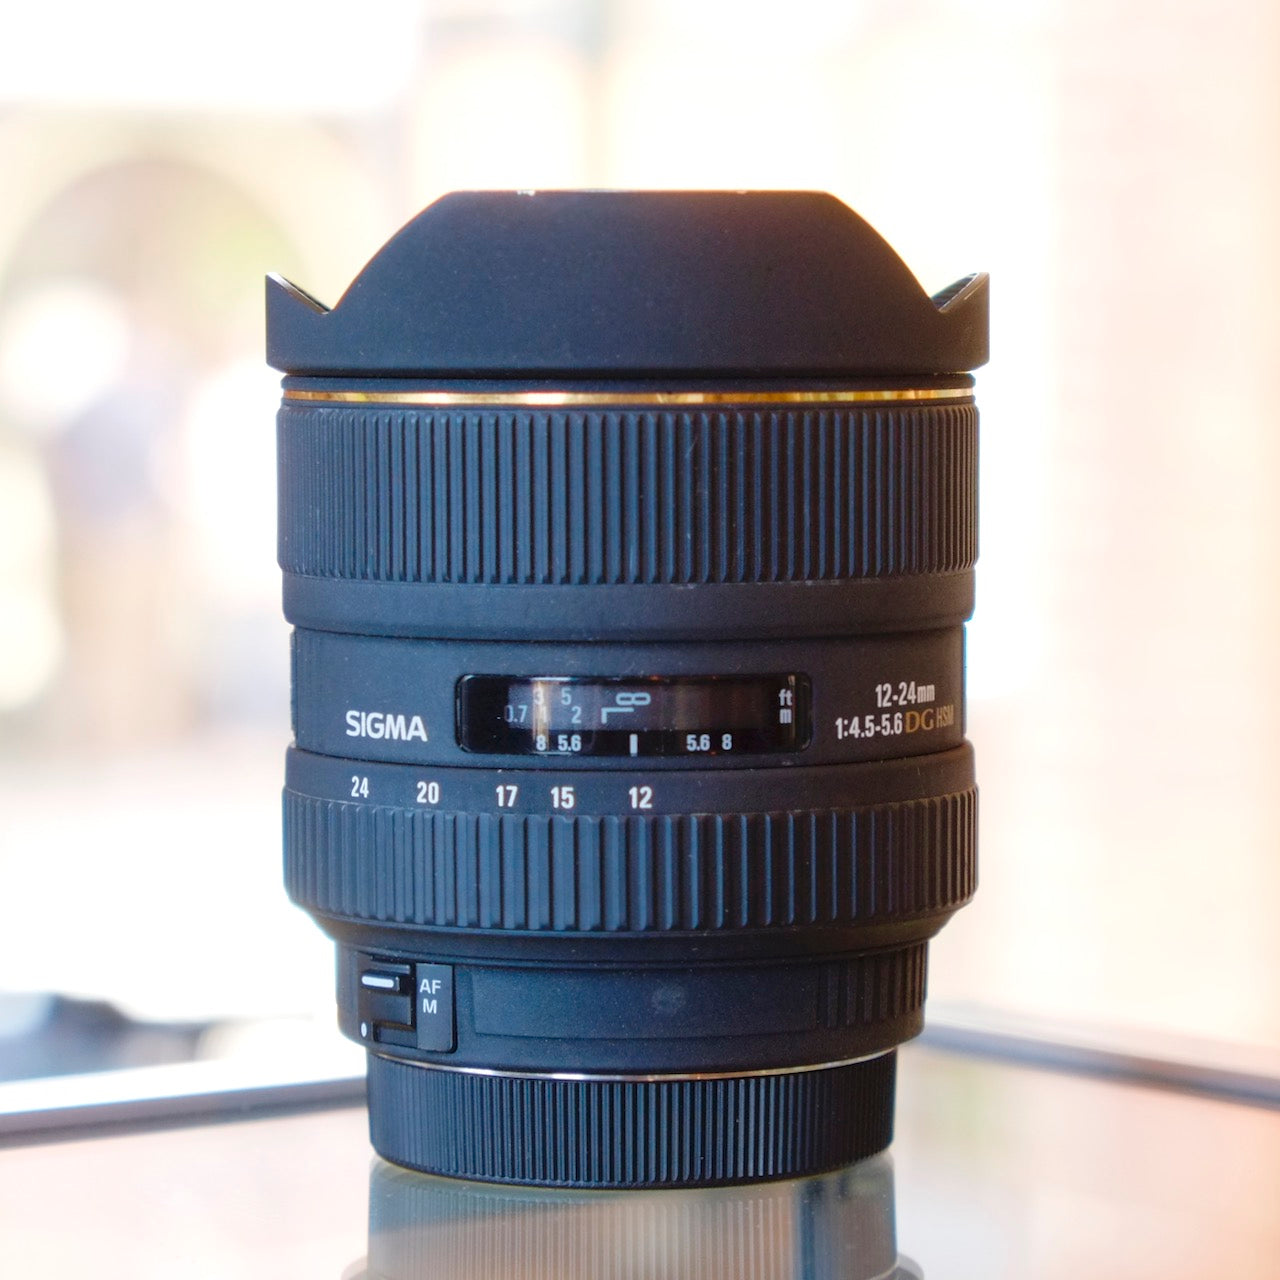 Sigma EX 12-24mm f4.5-5.6 DG HSM for Canon EF